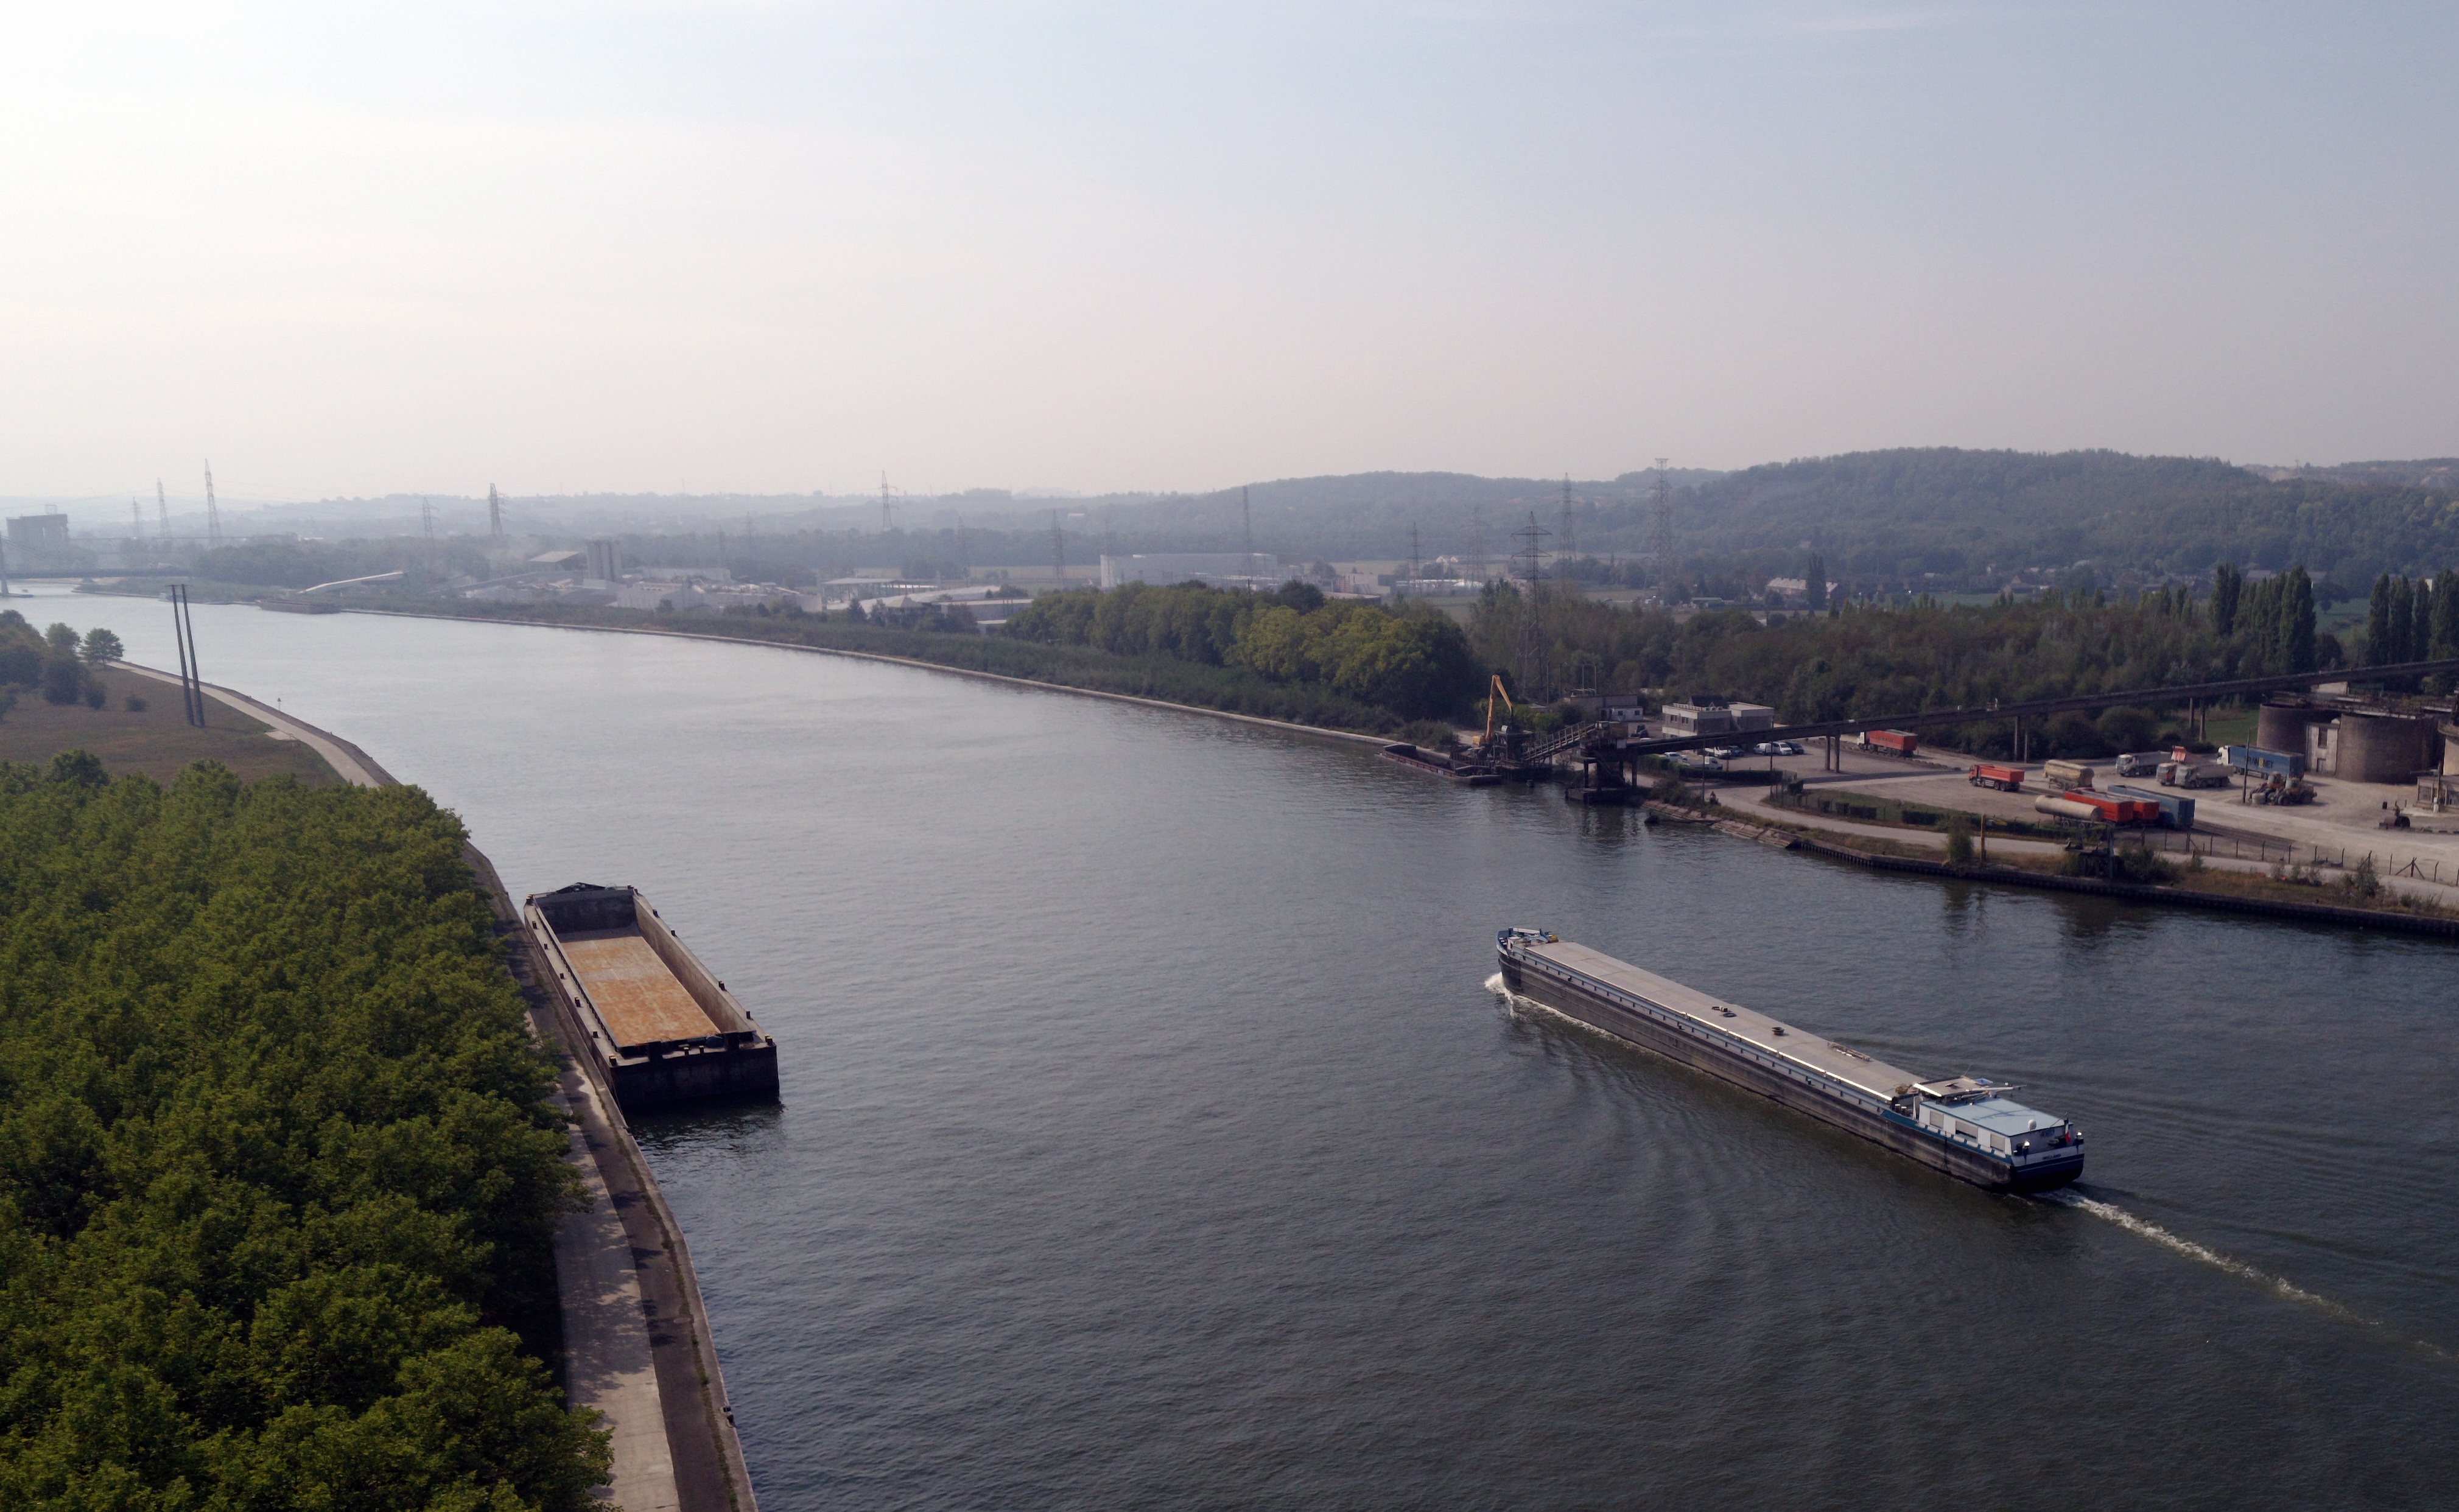 One million containers shipped by inland navigation in Flanders